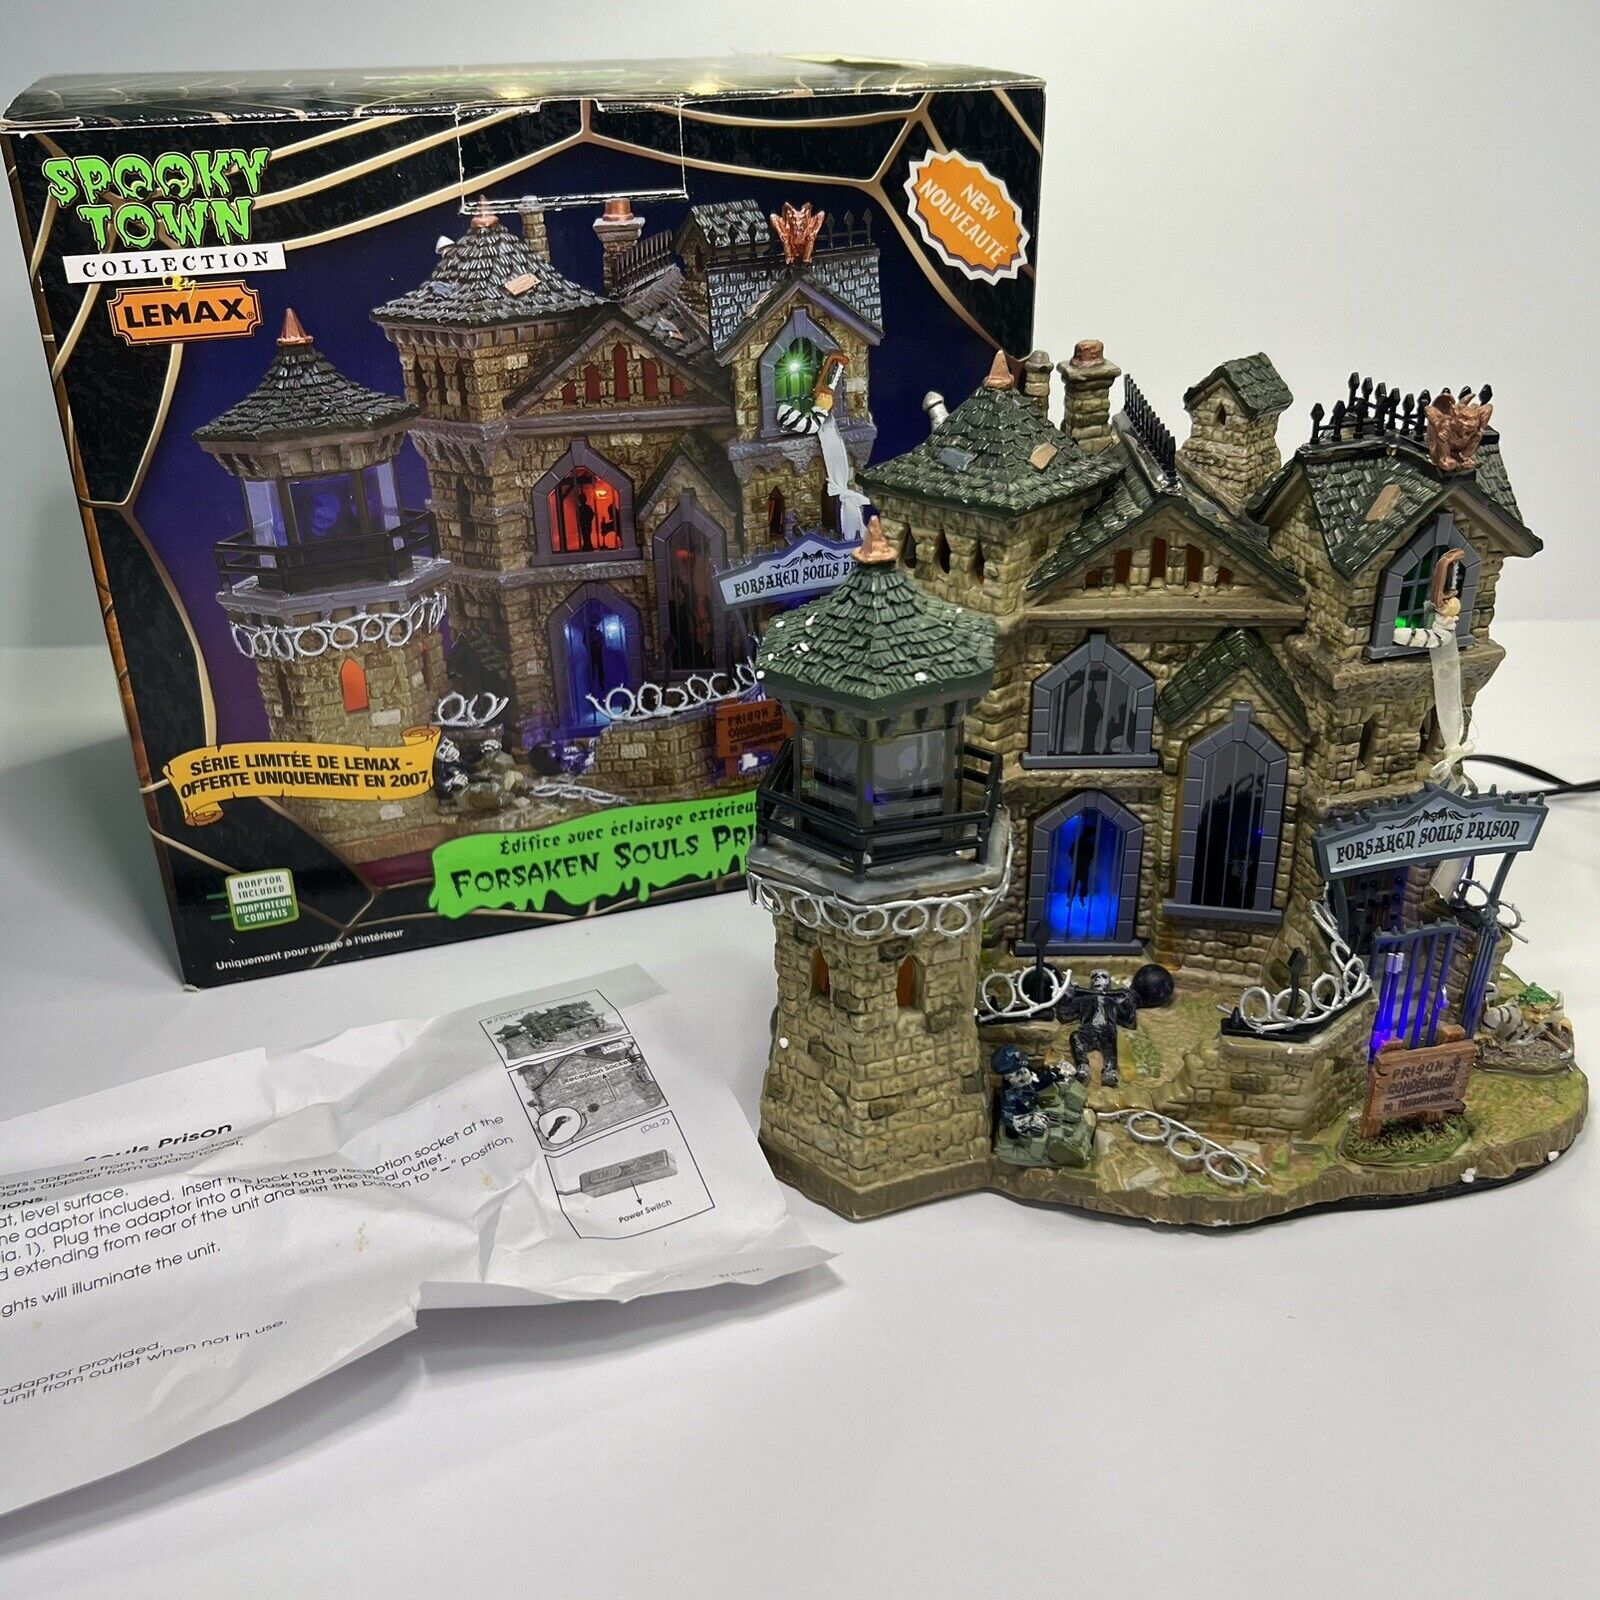 Lemax Spooky Town Forsaken Souls Prison With Extra Power Adapter